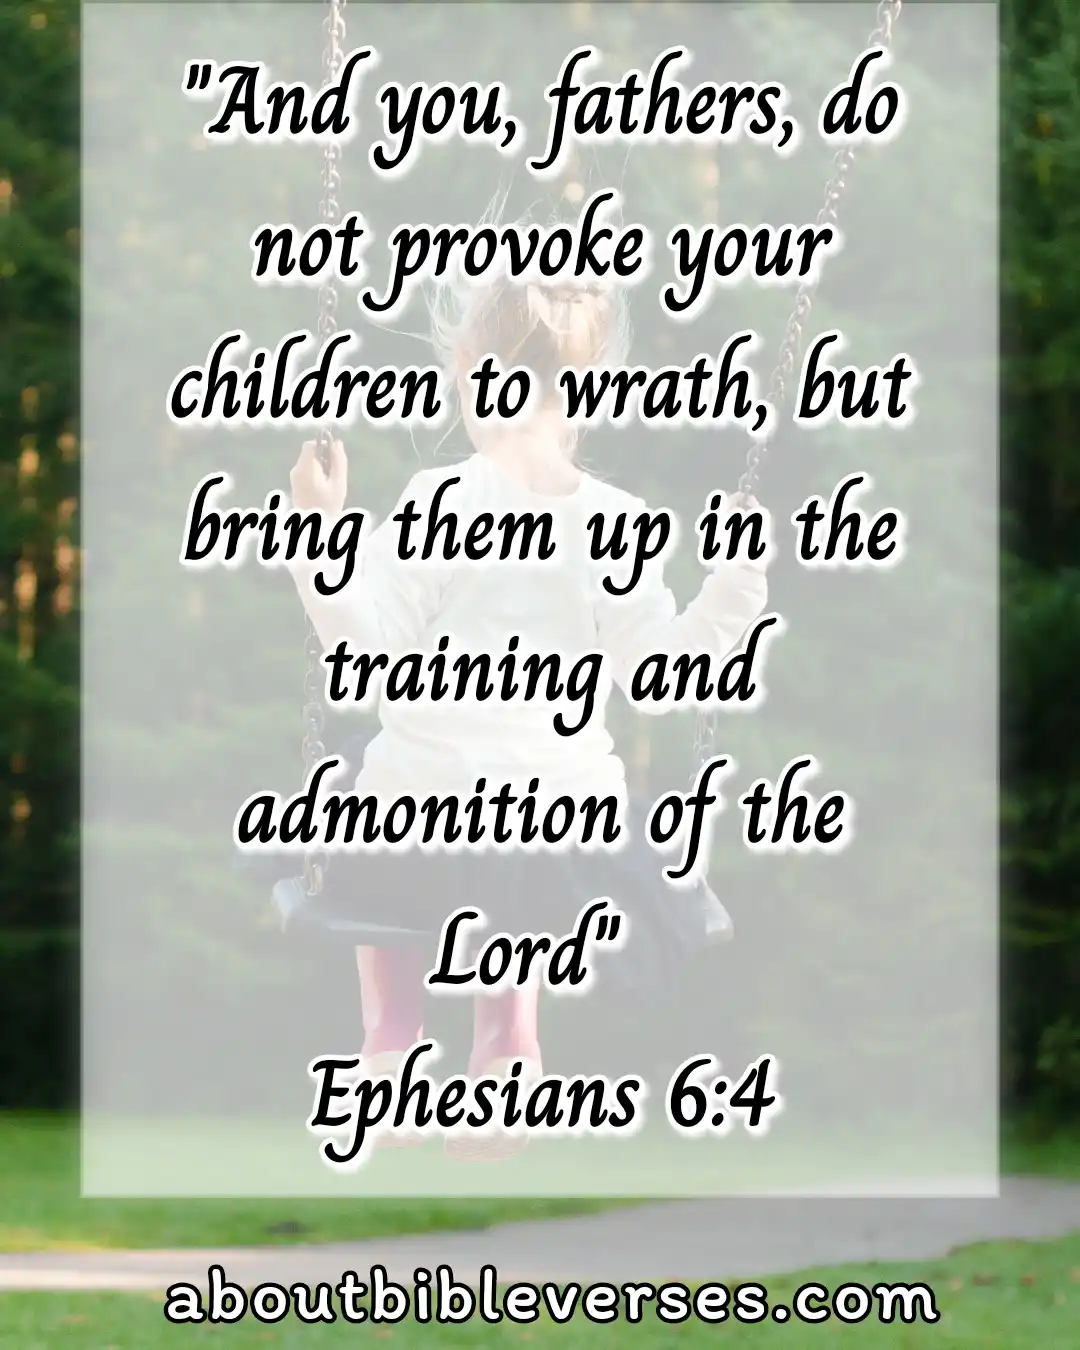 Bible Verses About Concern For The Family And Future Generations (Ephesians 6:4)